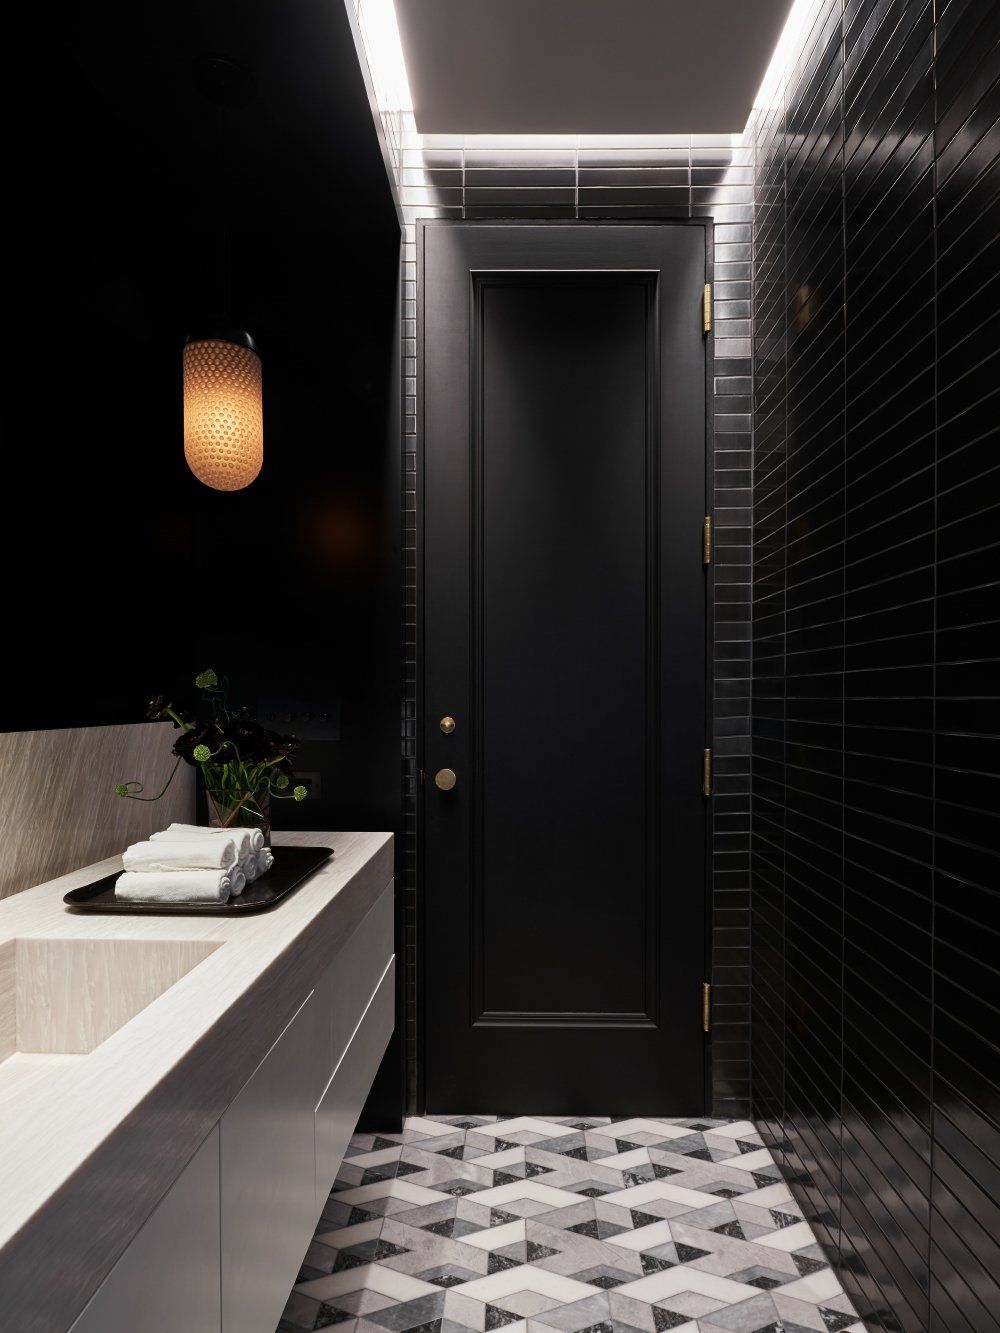 The closet was converted into a powder room with geometric floor tiles and black walls